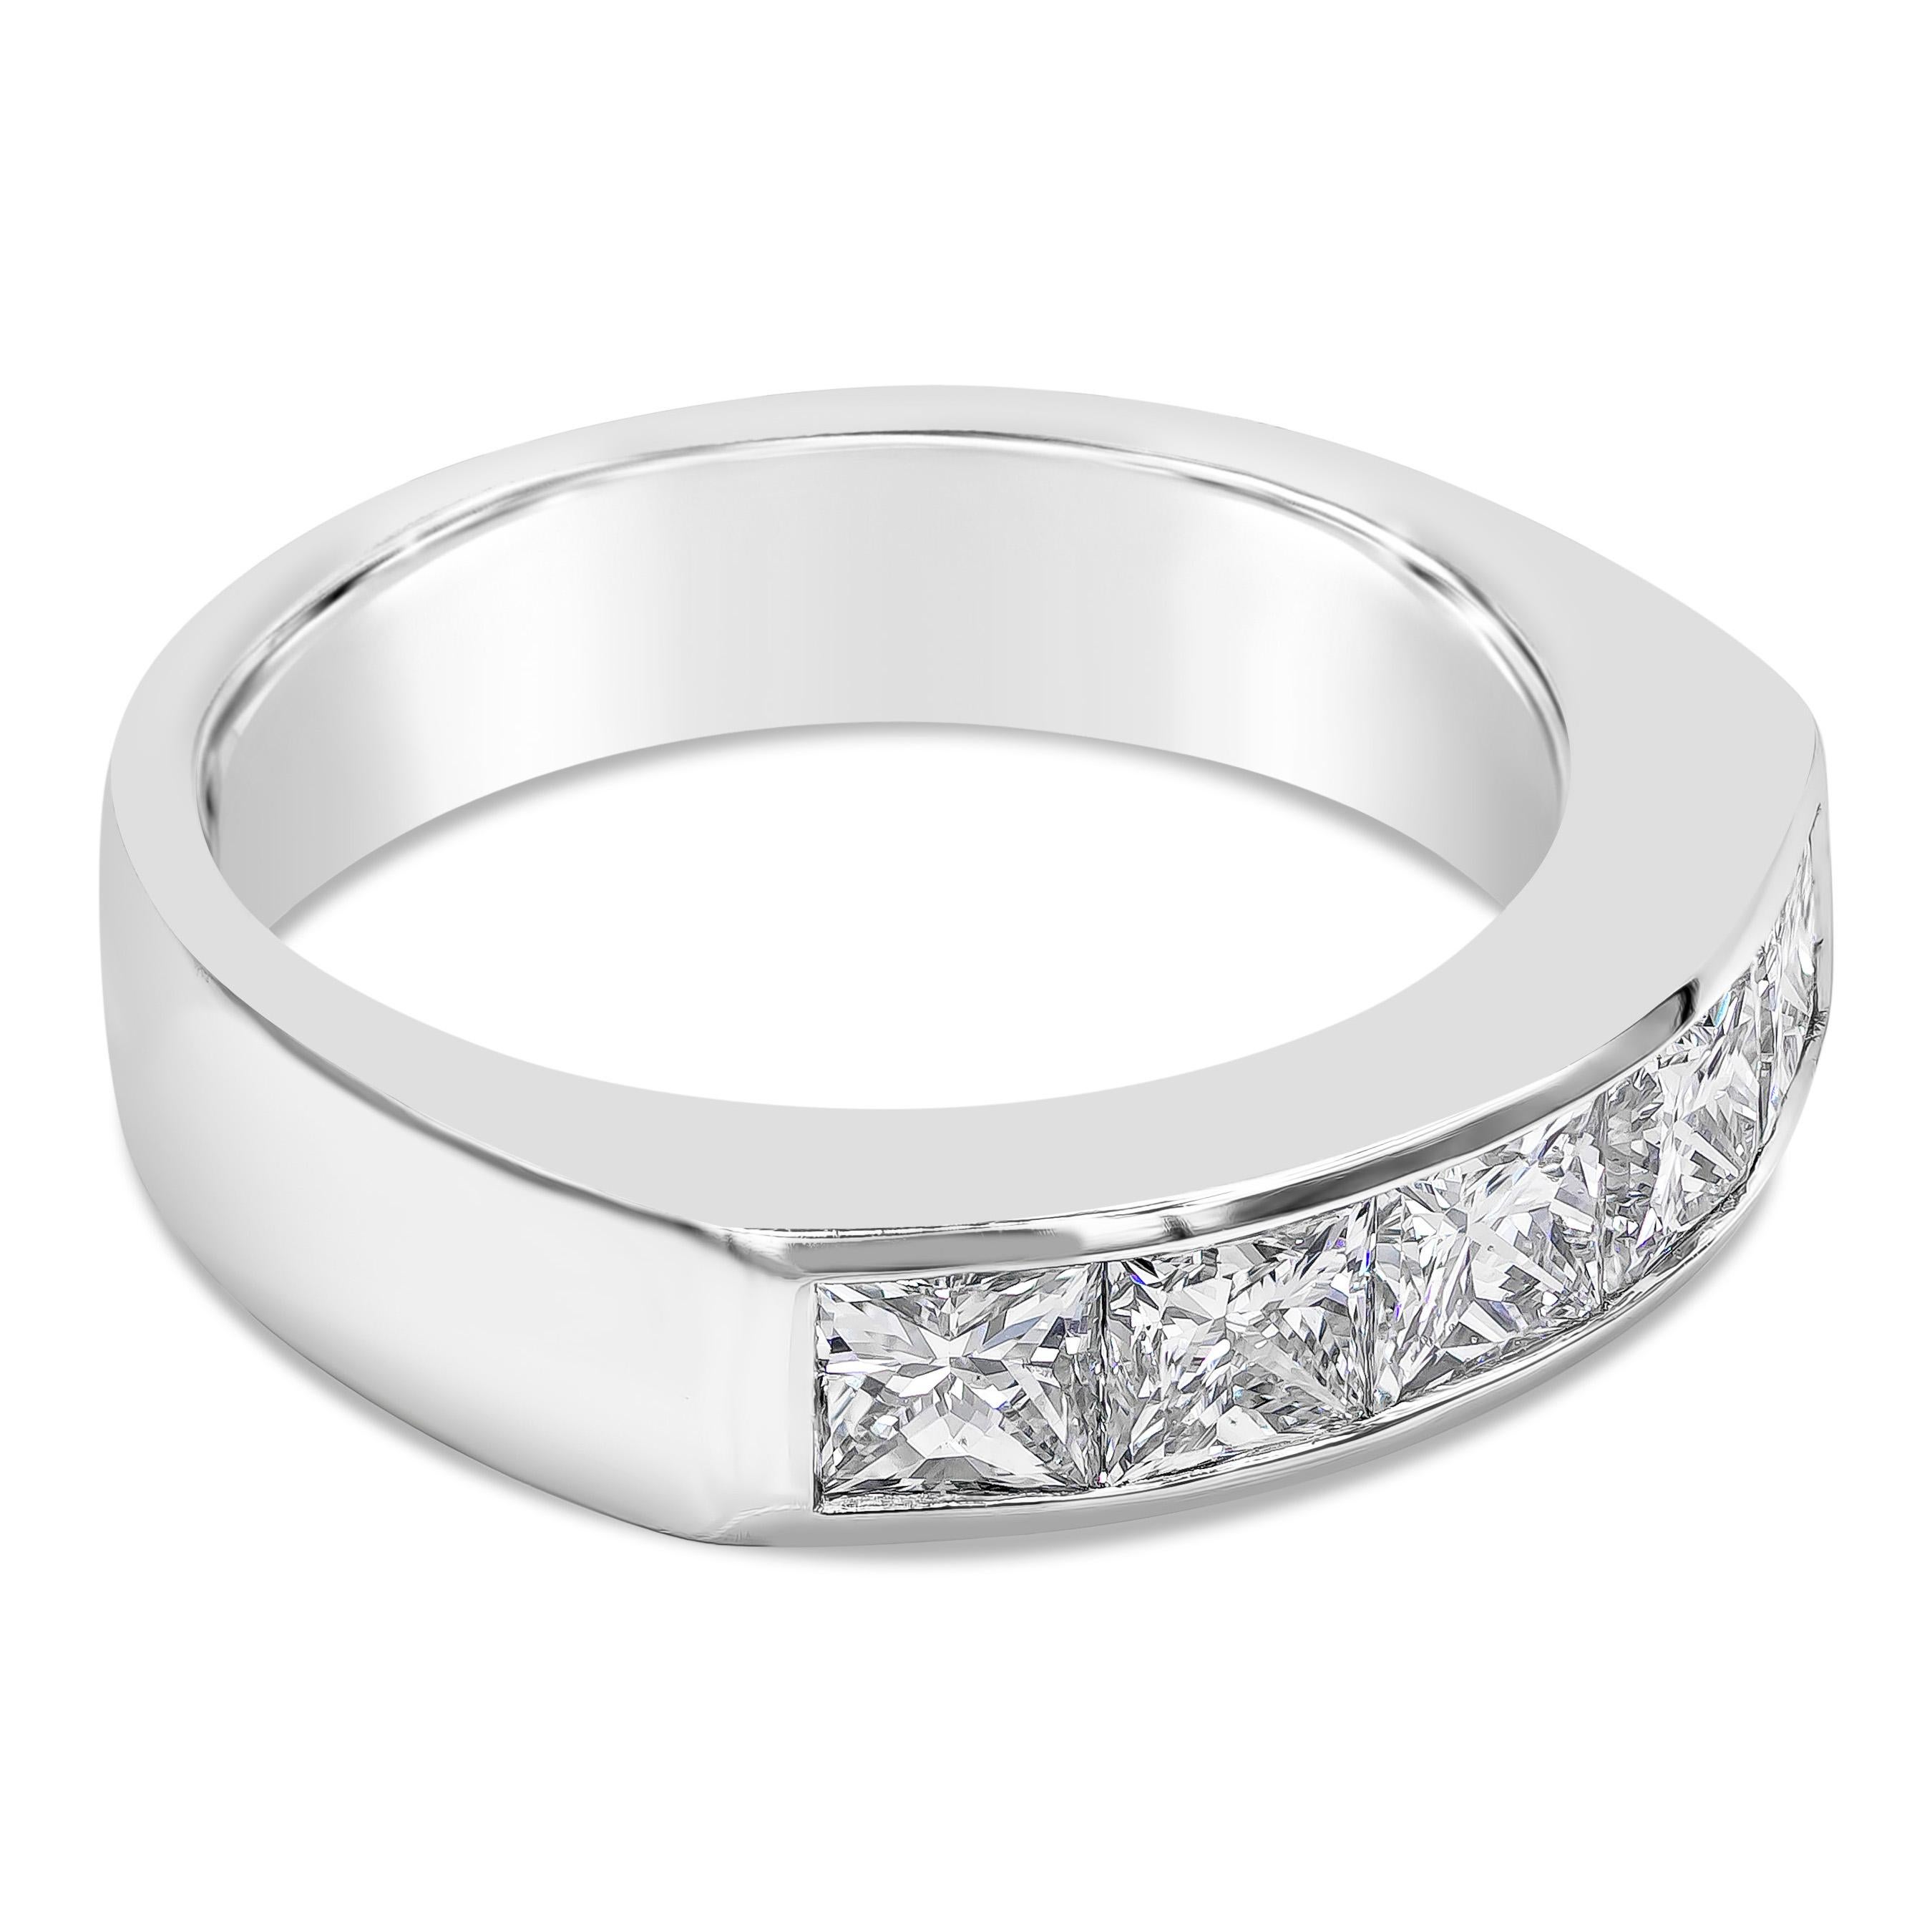 A subtle yet distinctive men's wide wedding band, showcasing five stone princess cut diamonds weighing 2.93 carats total. Channel set on a polished platinum mounting, 5.91 mm in width. Size 12 US, resizable upon request.

Roman Malakov is a custom